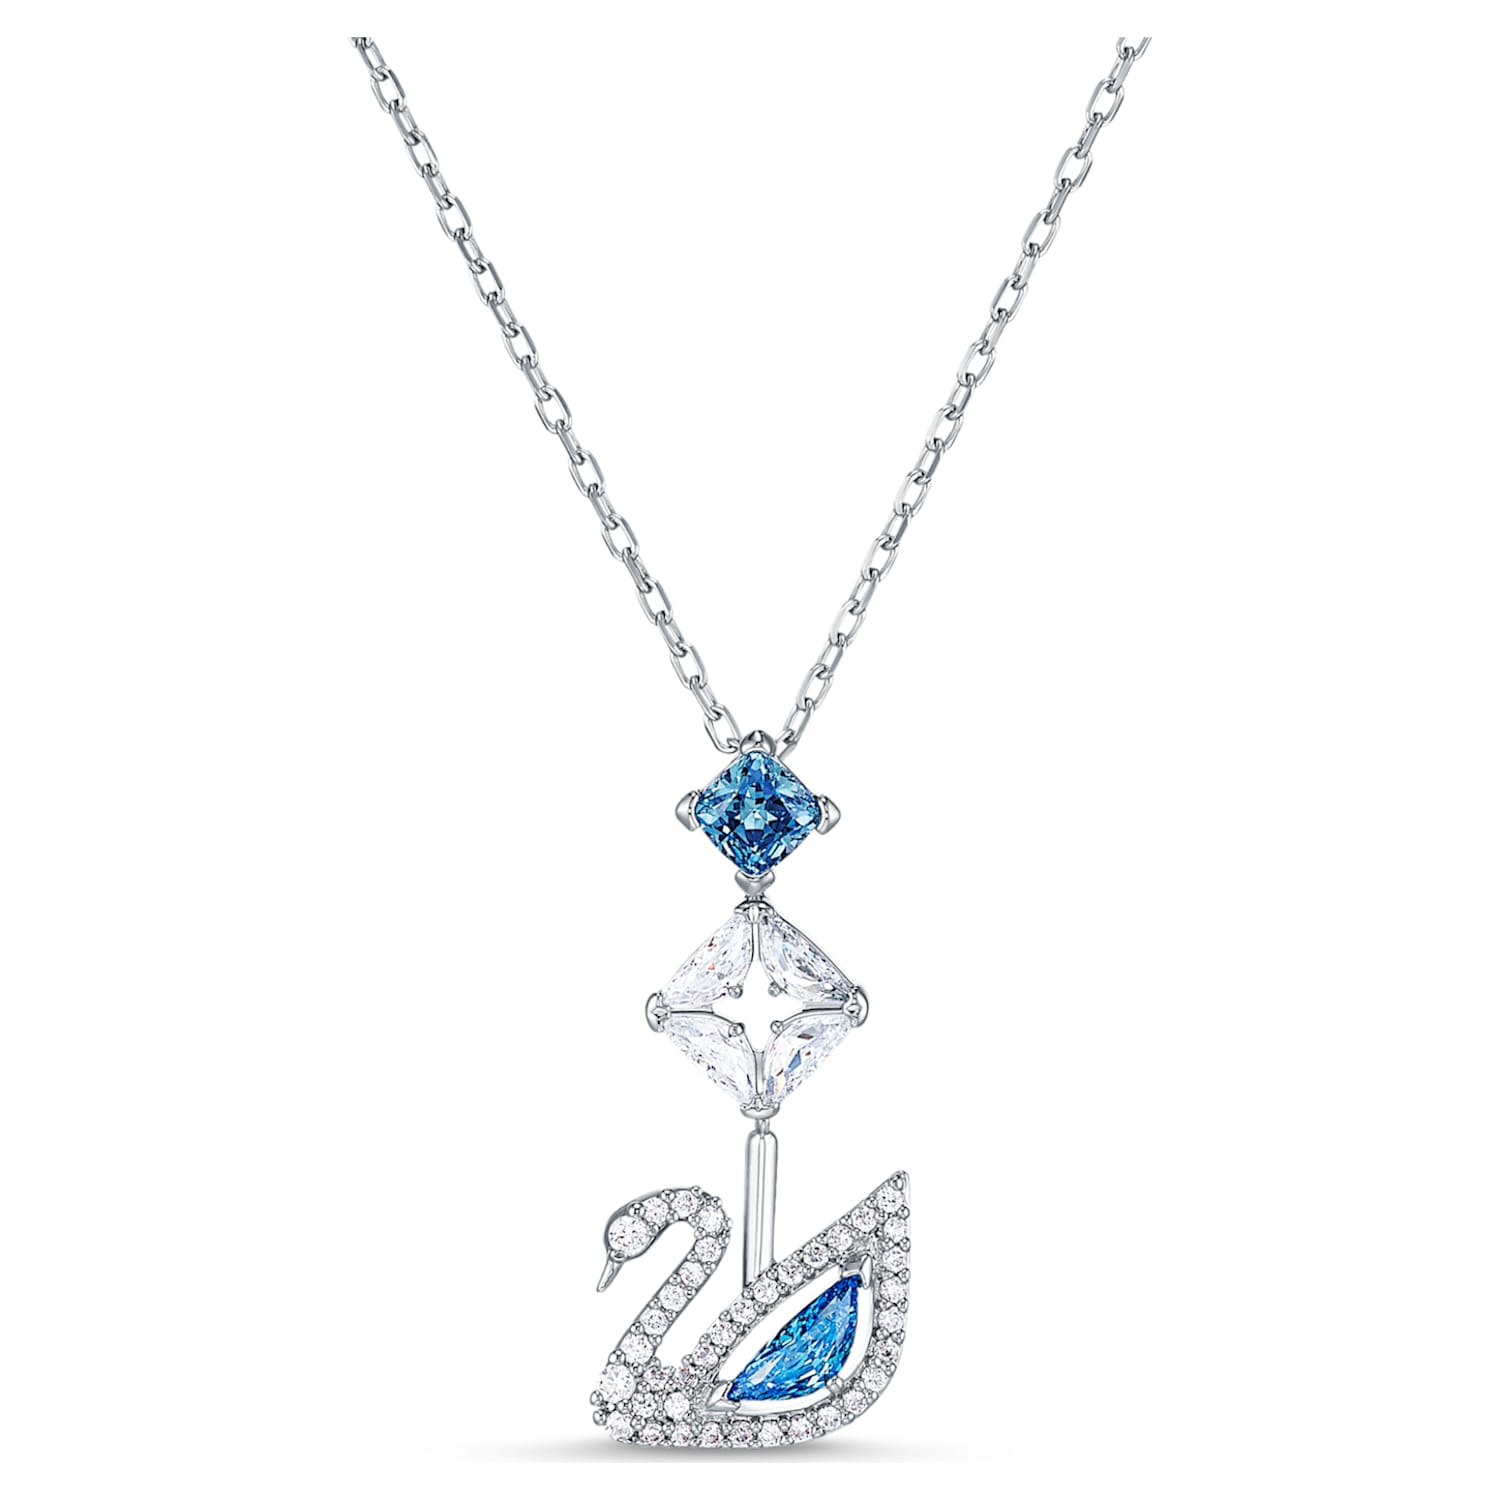 Elegant Sterling Silver swan pendant adorns this uniquely beaded necklace.